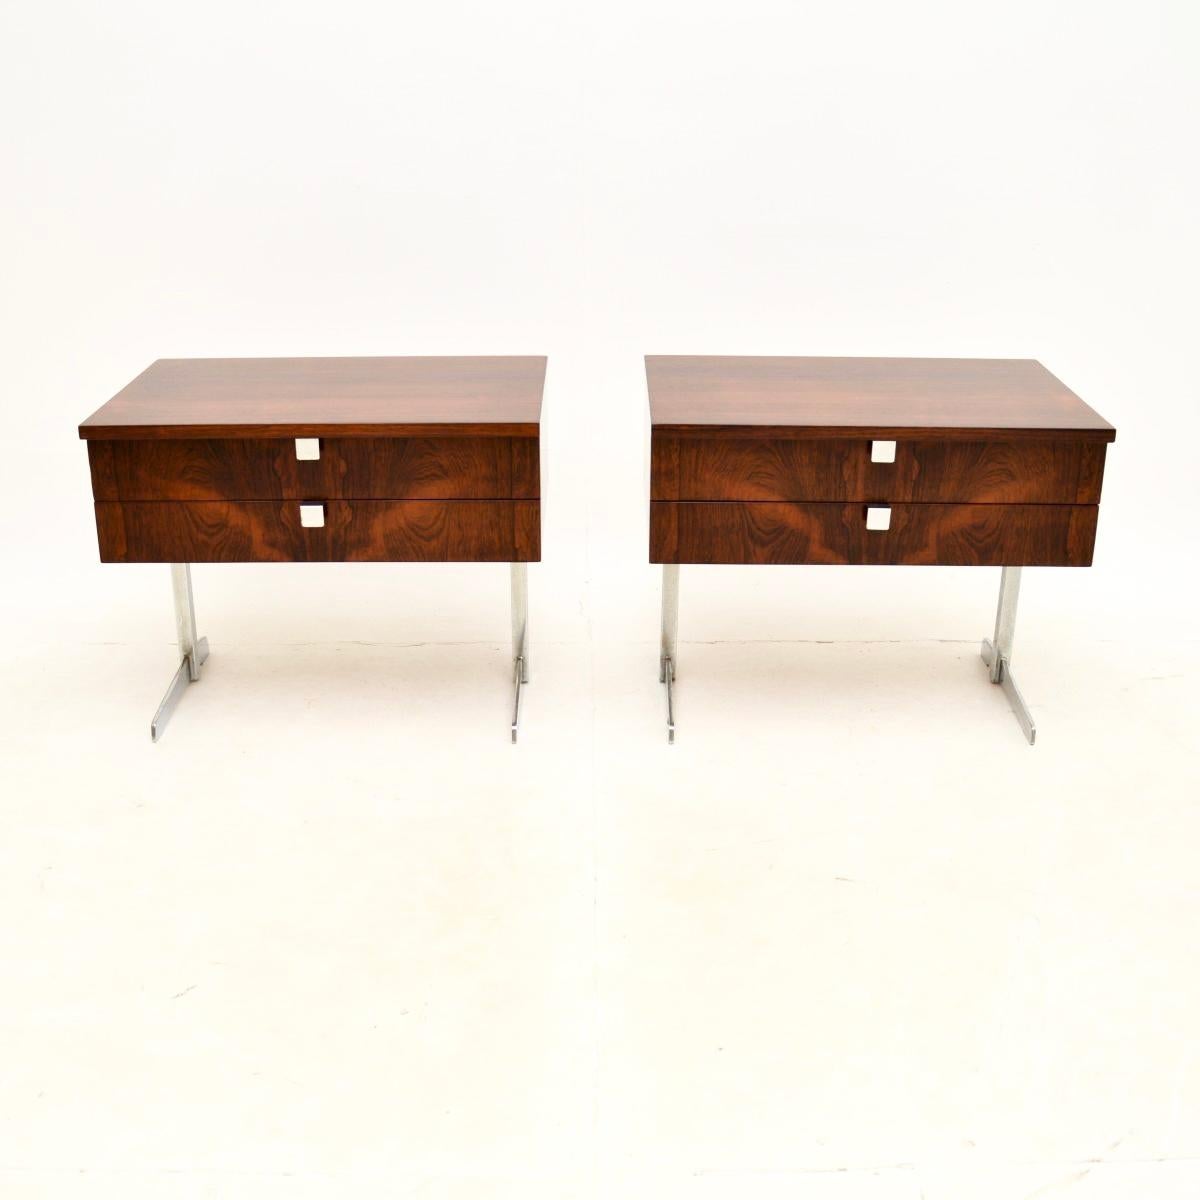 A stunning pair of vintage bedside / side tables. They were made in Belgium, they date from the 1960-70’s.

The quality is outstanding, they are a useful size and beautifully designed. The wood has a gorgeous colour tone and lovely grain patterns.